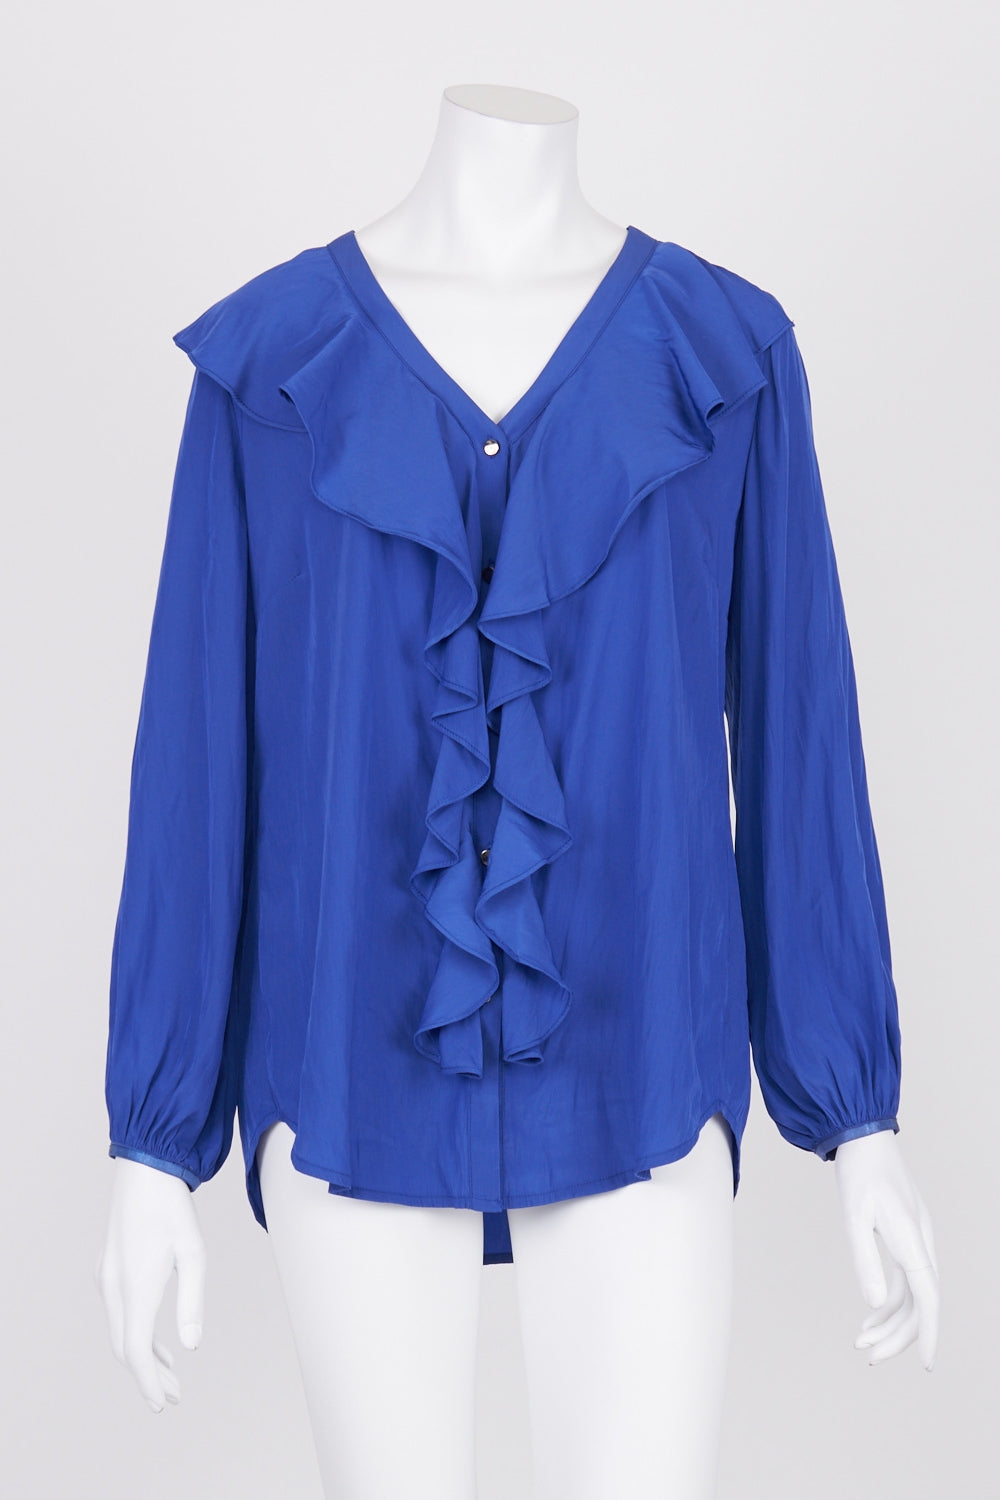 Motto Blue Ruffle Front Top 12